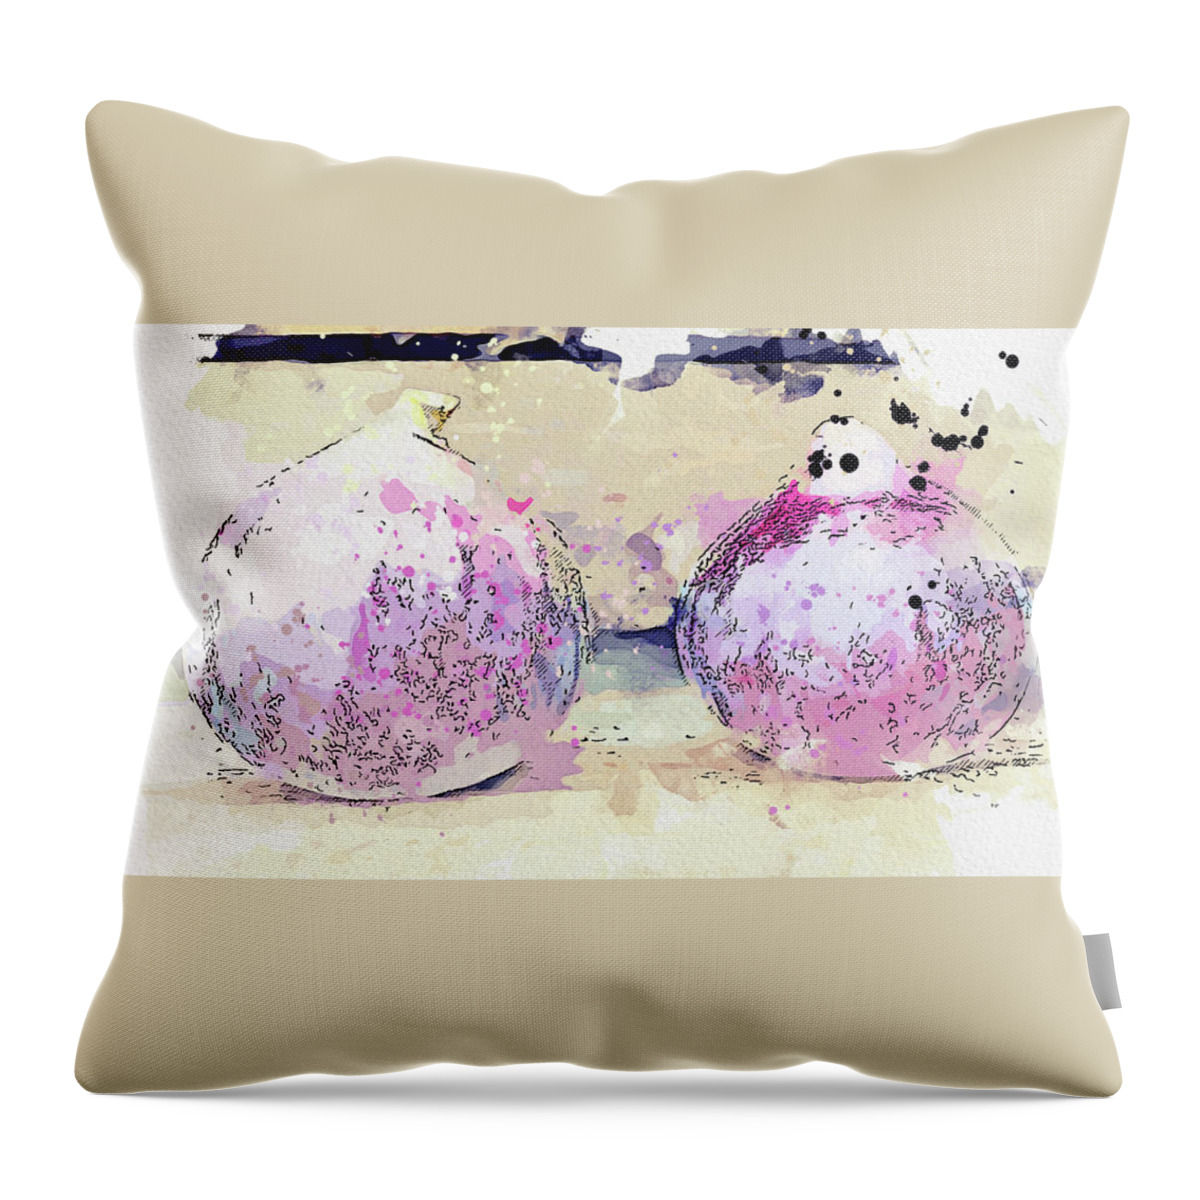 Er Throw Pillow featuring the painting Fragola Nera fig 2, ca 2021 by Ahmet Asar, Asar Studios by Celestial Images